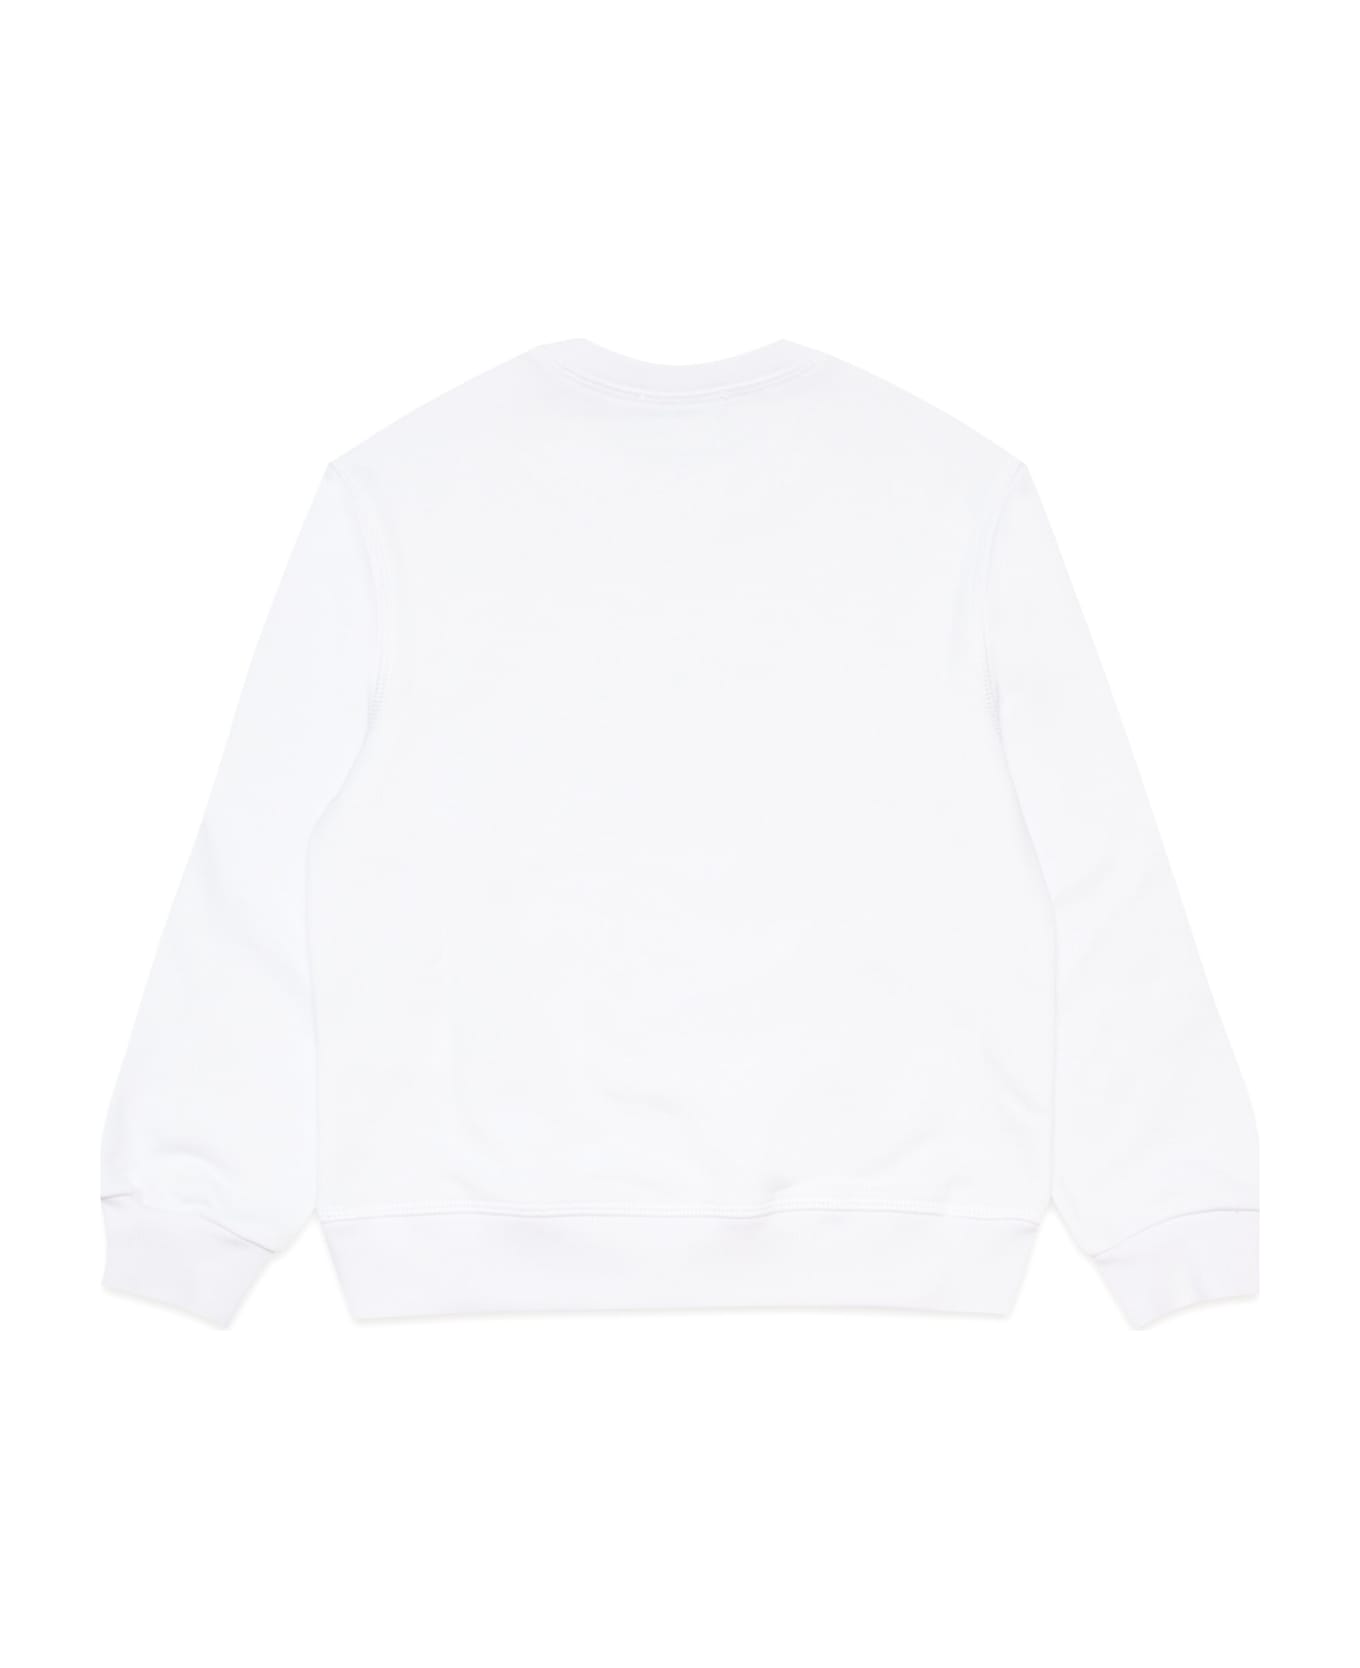 Dsquared2 D2s718u Relax Sweat-shirt Dsquared Crew-neck, Long-sleeved, Cotton Sweatshirt With Elastic On Neck, Hem And Cuffs. Fit: Relaxed Fit, Regular. The Garm - Bianco ニットウェア＆スウェットシャツ